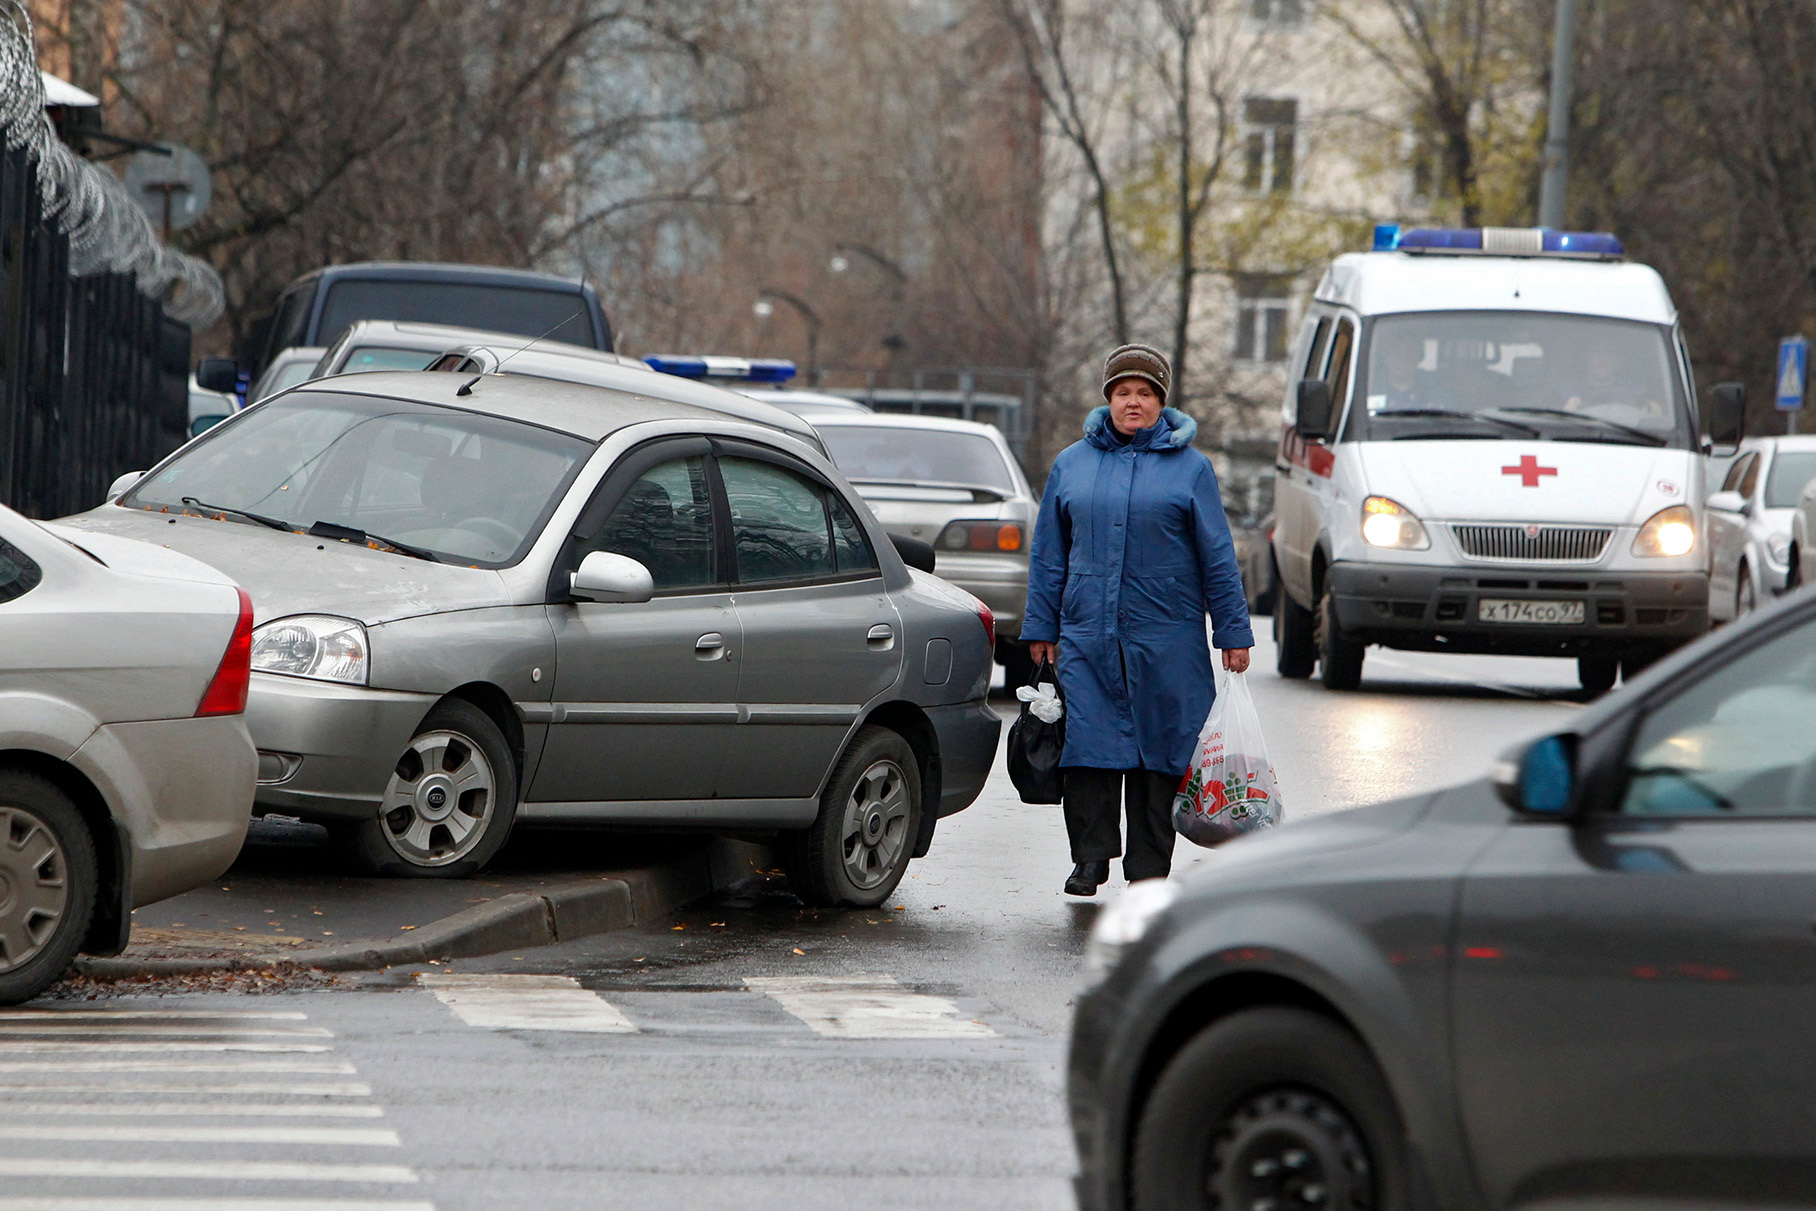 Moscow drivers have become much less likely to park cars on sidewalks